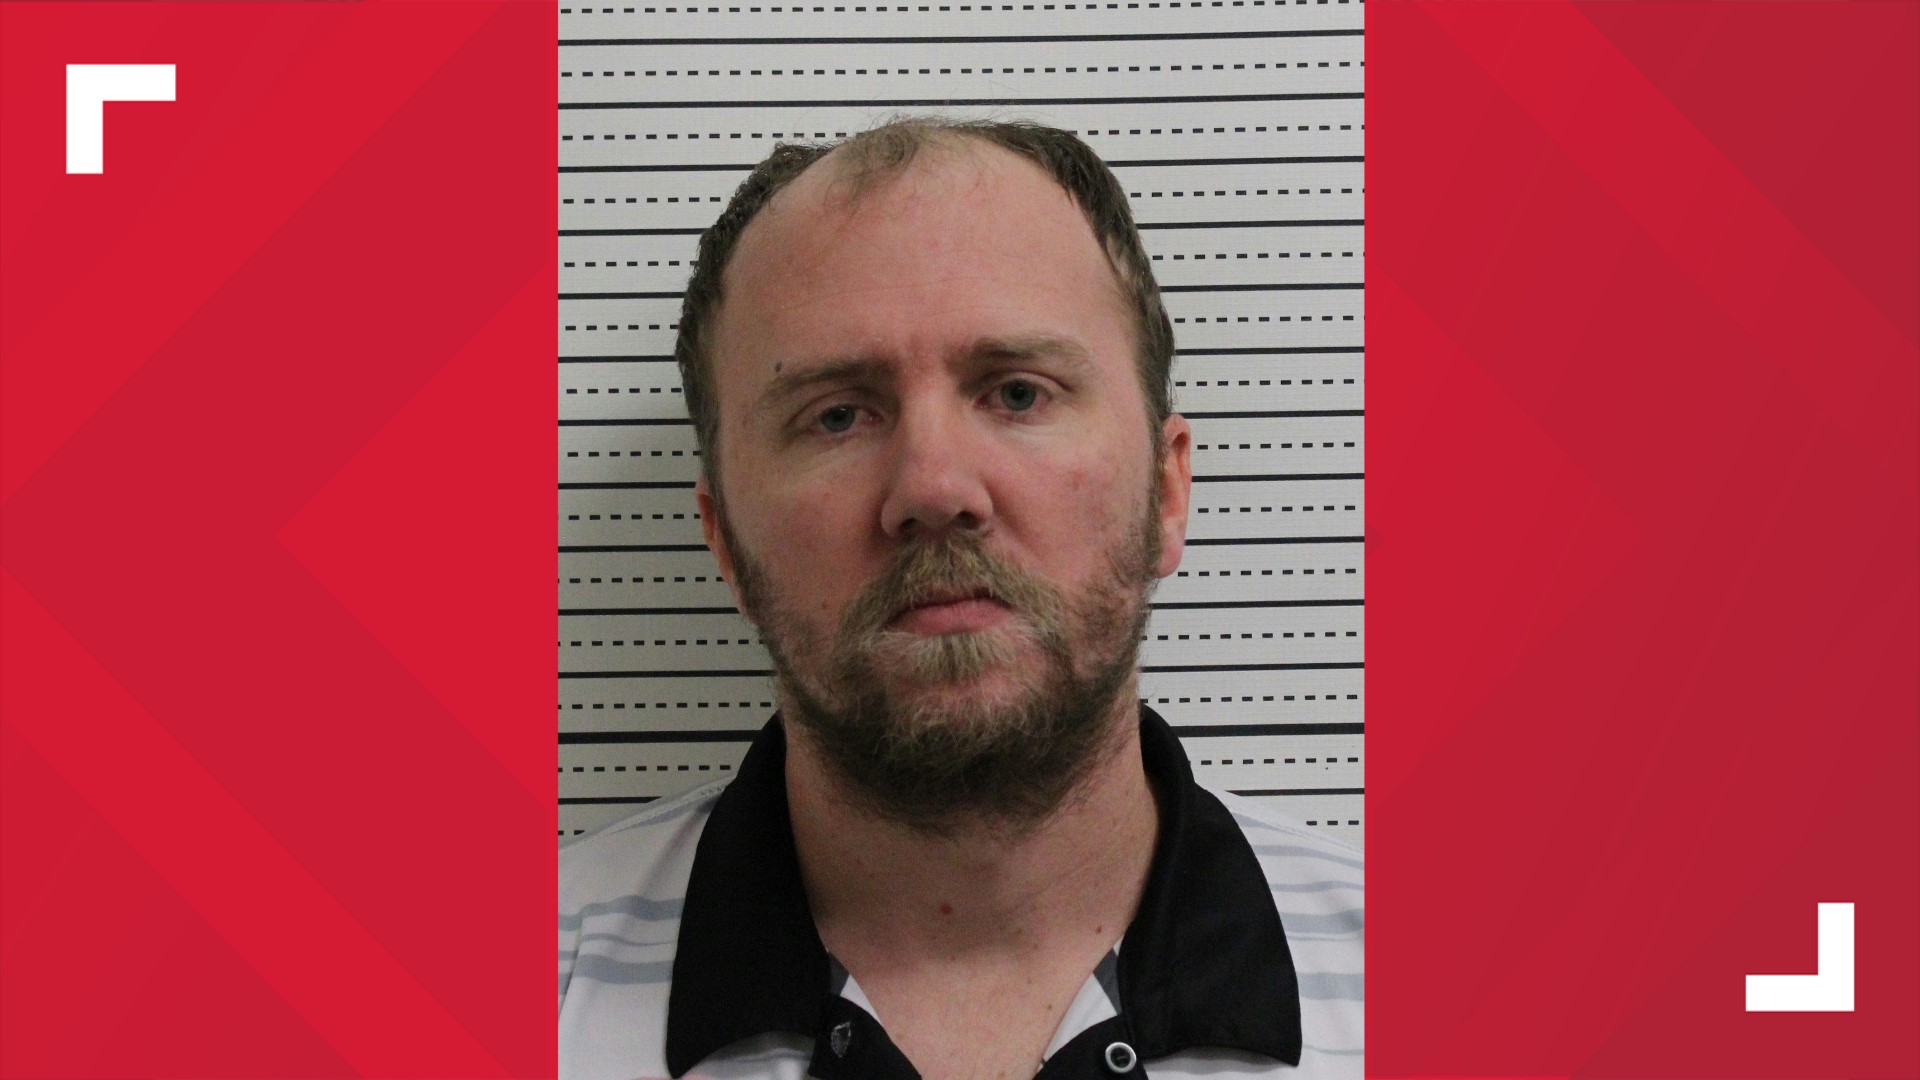 Brandon Novak, 35, of Chillicothe, Ohio, was taken into custody Feb. 1 by U.S. Marshals at the 2024 U.S. Open Bowling Tournament in Indianapolis.